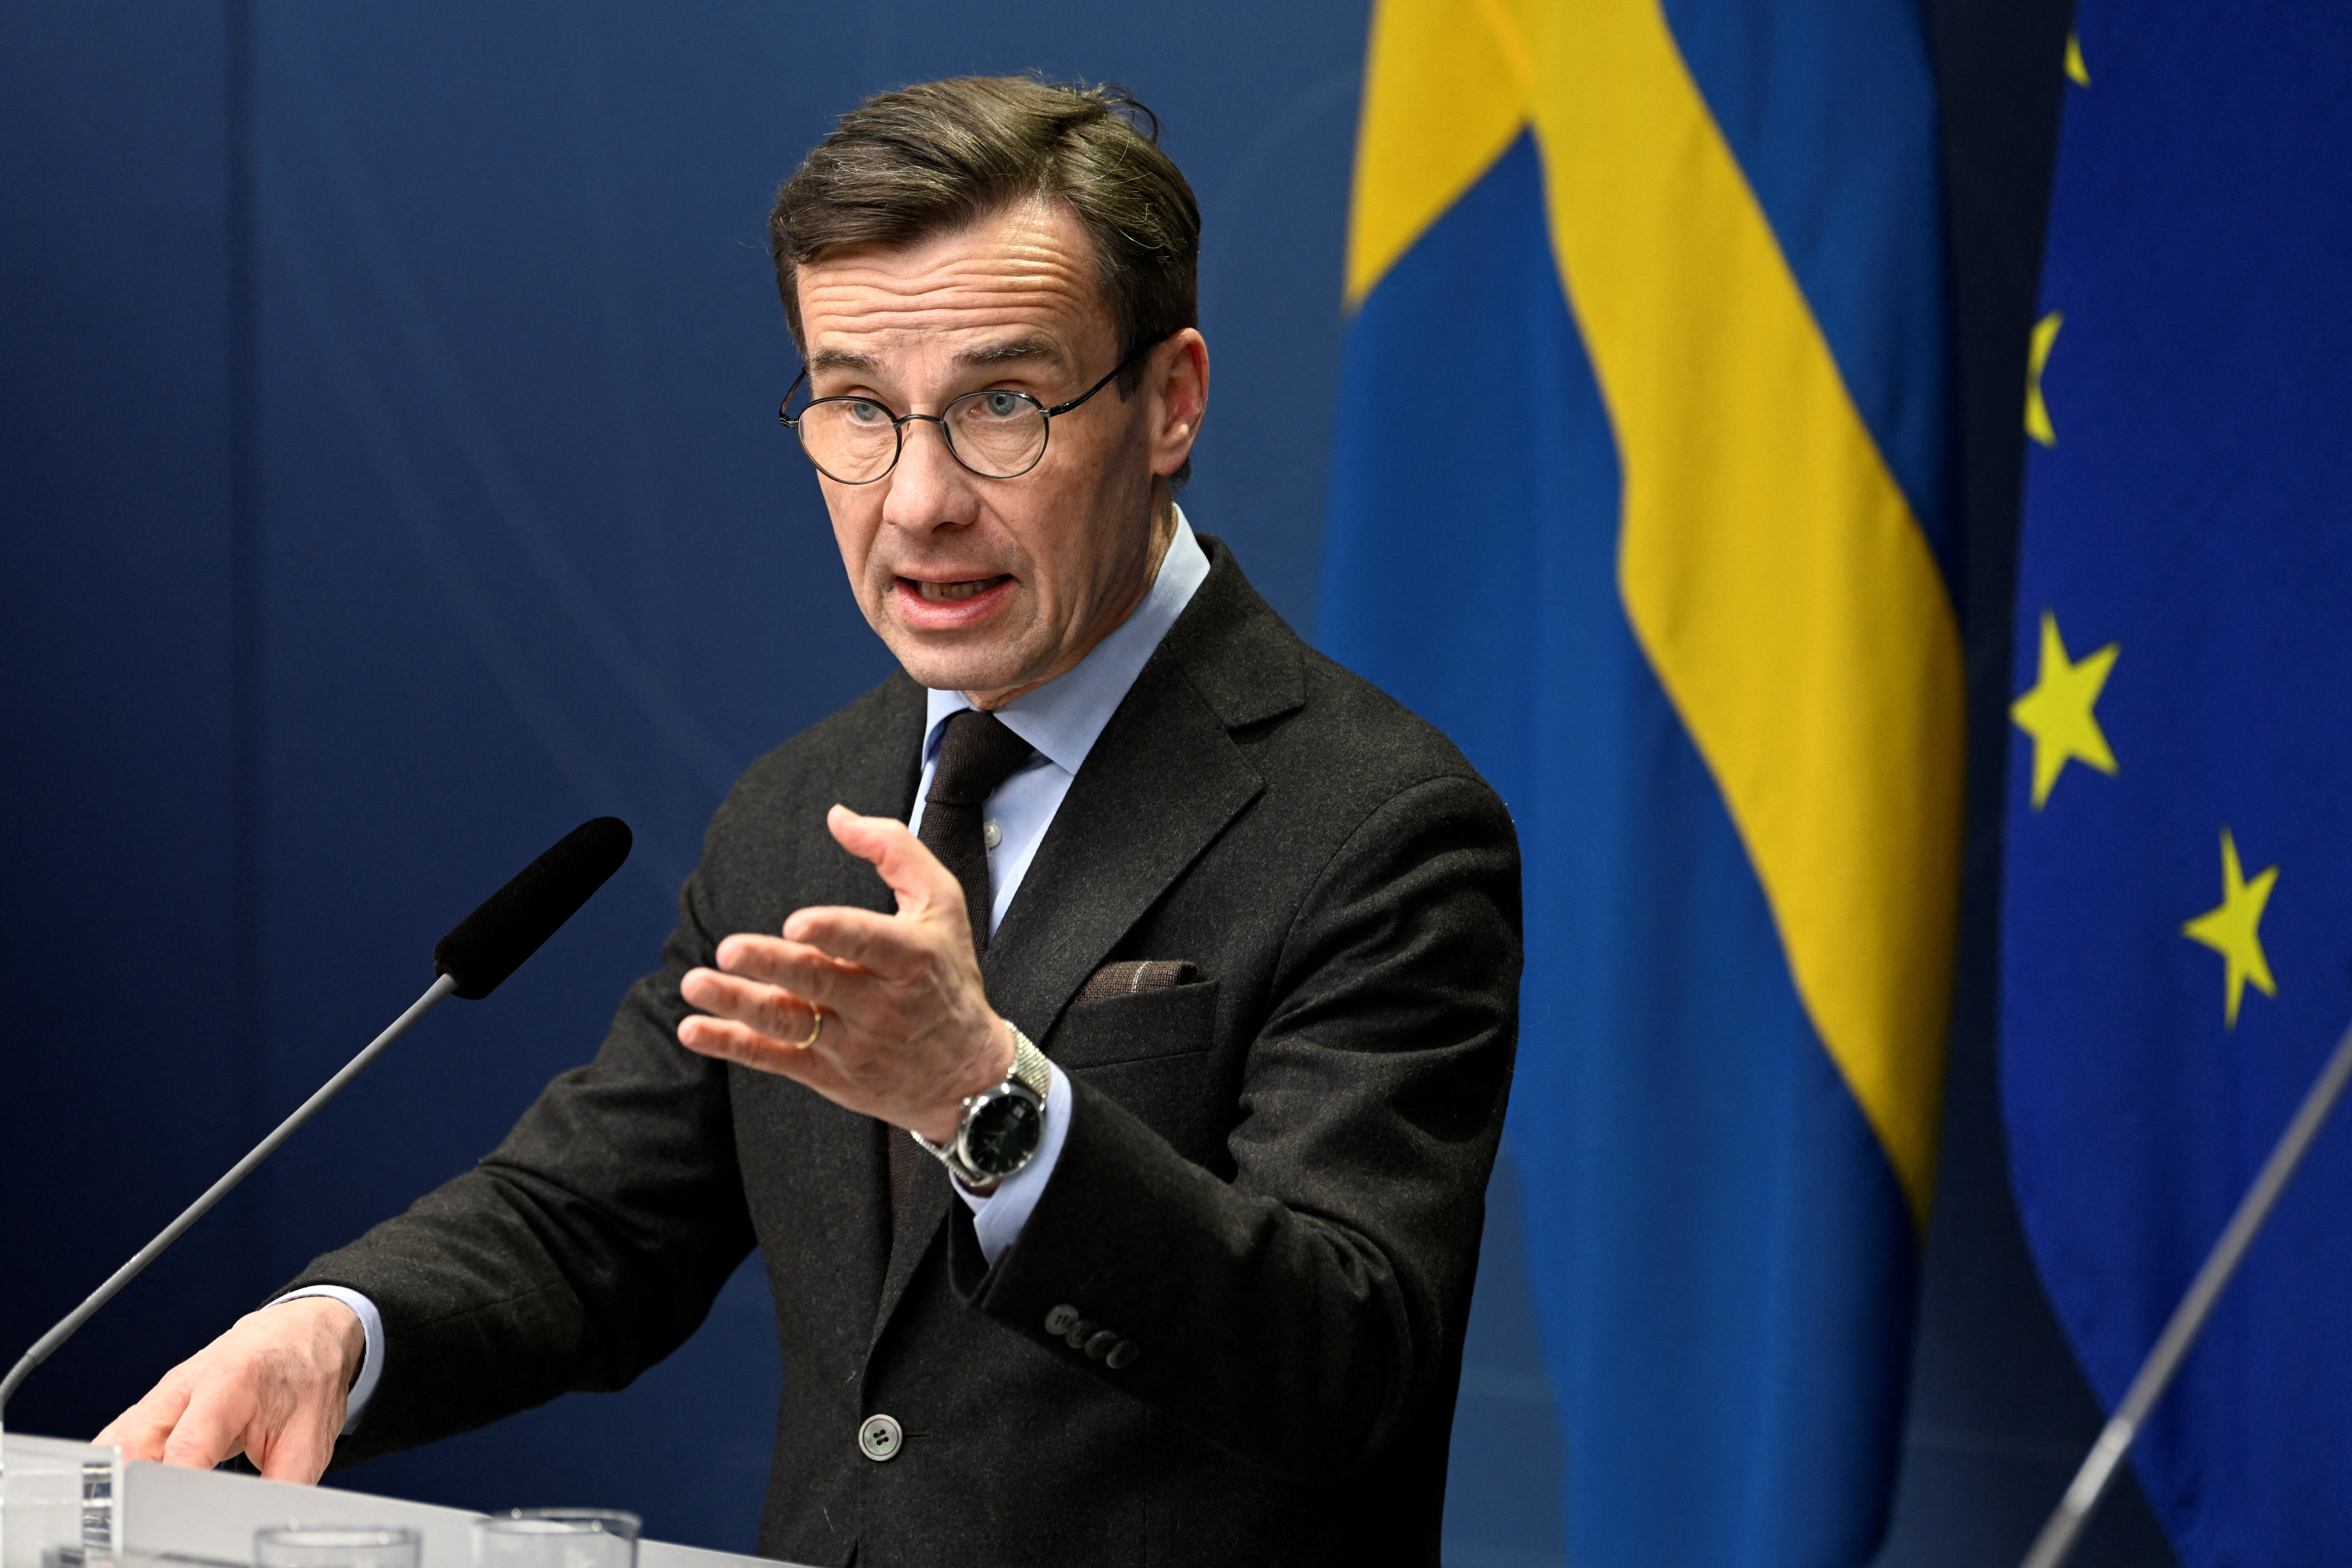 Ulf Kristersson assured that Ankara's demands are being studied in the way they should be studied (REUTERS)